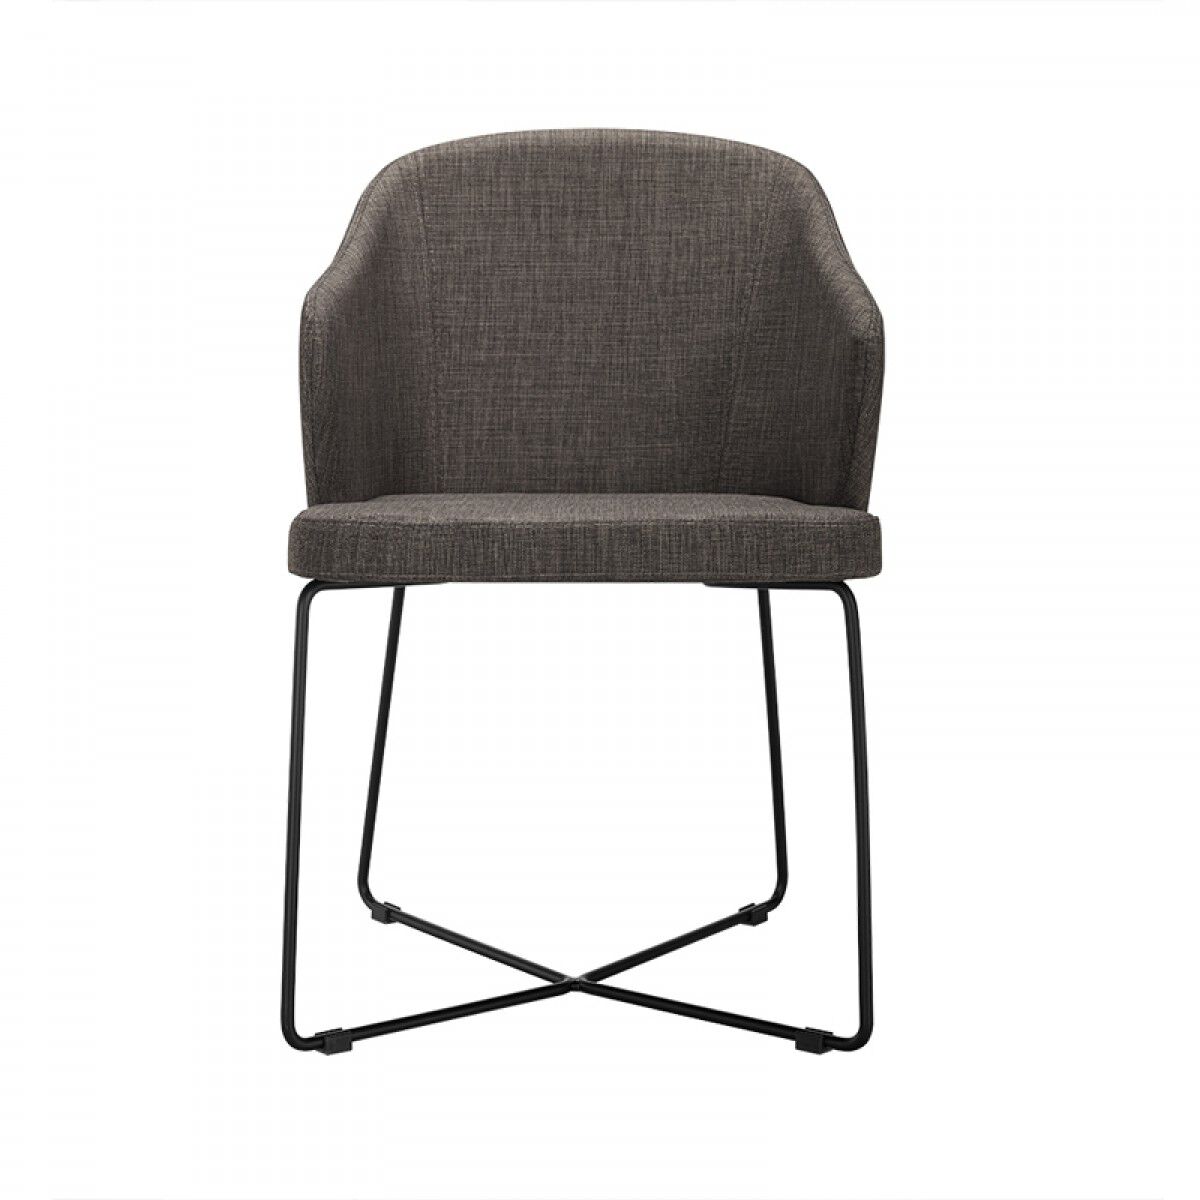 Fabric Upholstered Dining Chair with Metal Legs, Set of 2, Gray and Black